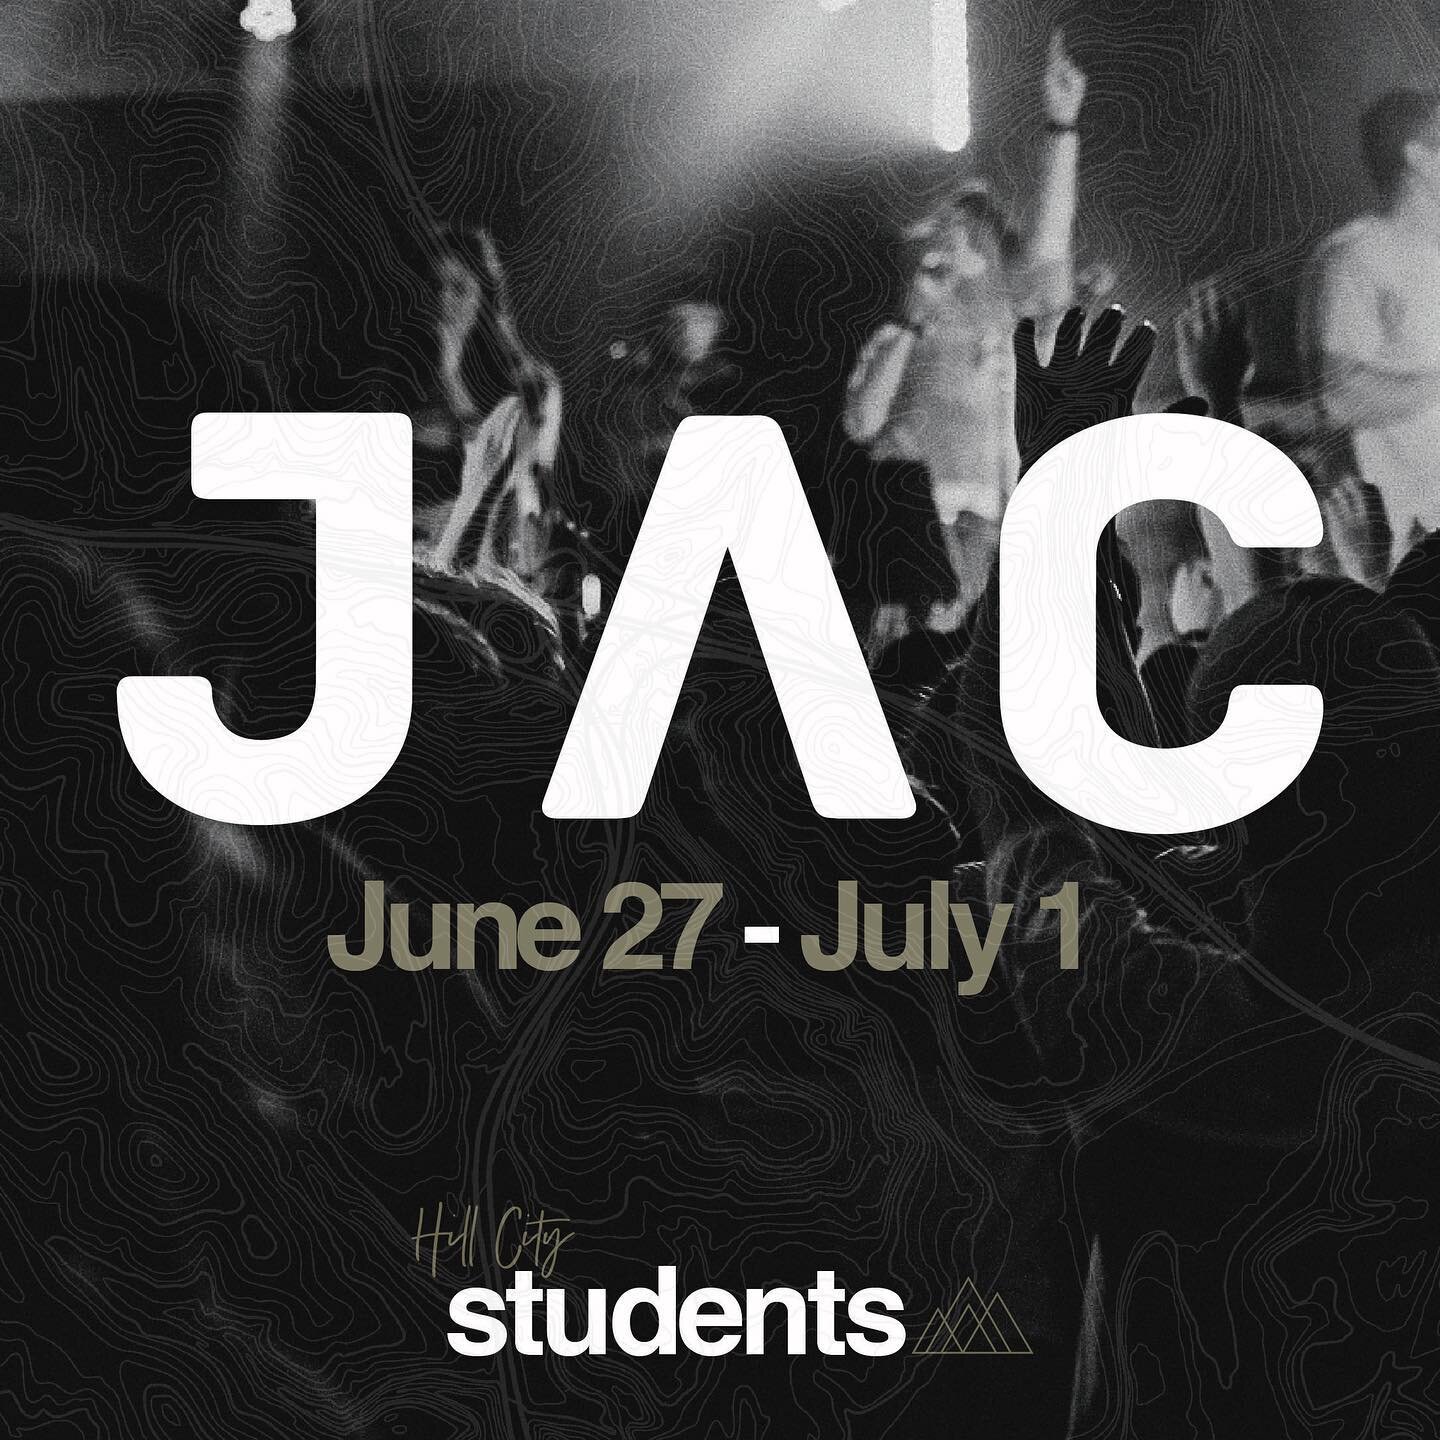 JAC registration is LIVE! Shoot us a DM to get the registration link. If you don&rsquo;t know what JAC is, it&rsquo;s our summer camp that takes place between June 27-July 1. We have a ton of fun, but more importantly spend time drawing closer to God